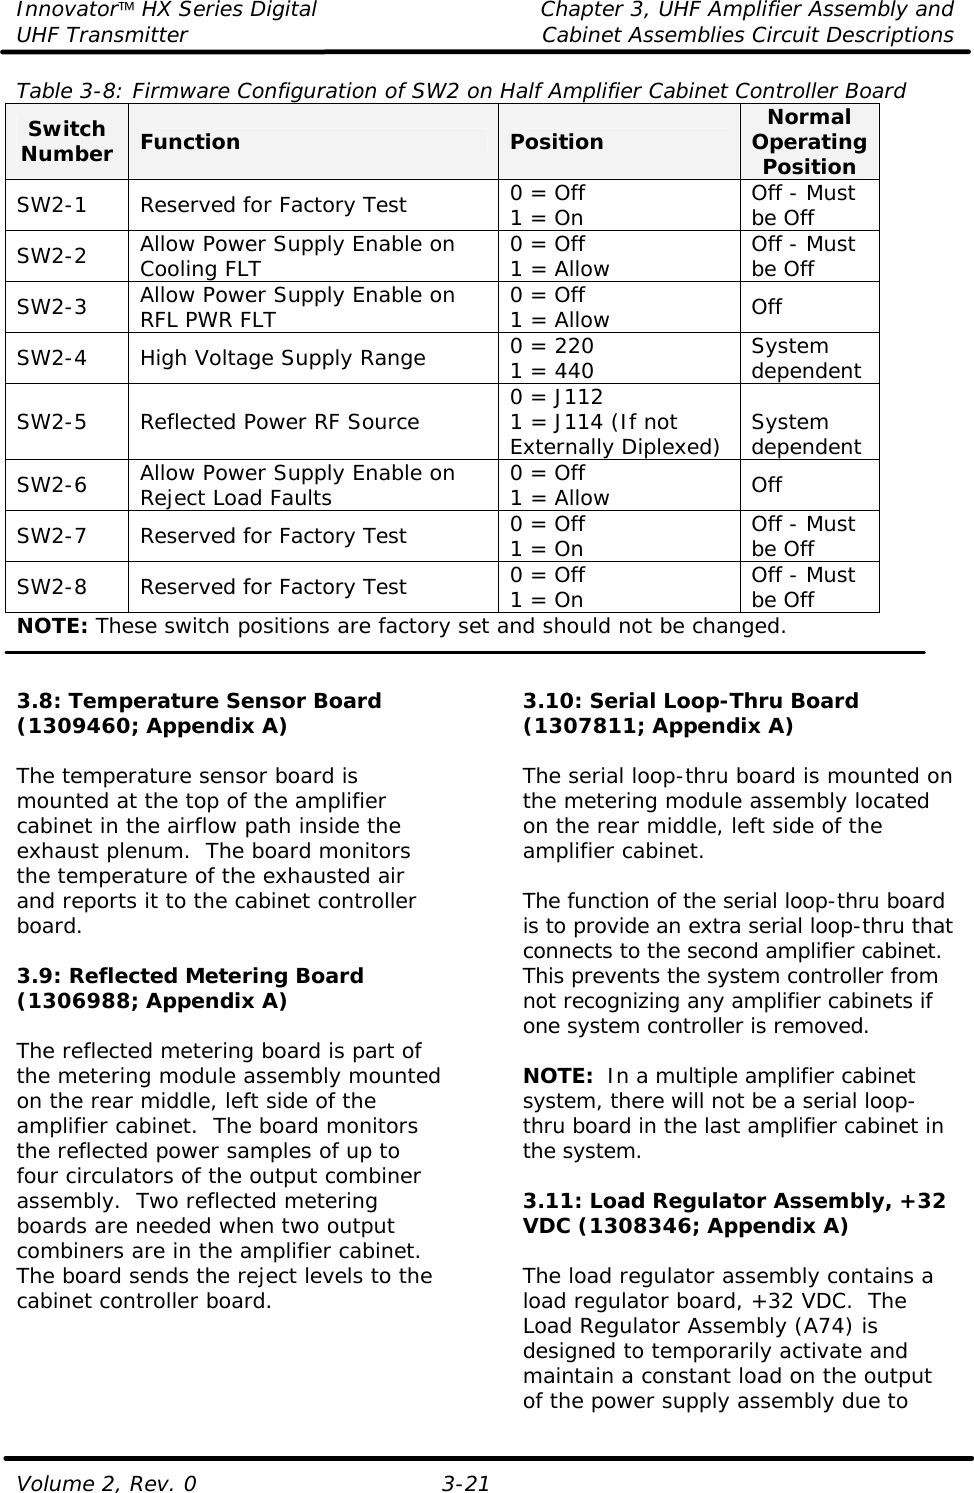 Innovator HX Series Digital Chapter 3, UHF Amplifier Assembly and UHF Transmitter Cabinet Assemblies Circuit Descriptions  Volume 2, Rev. 0 3-21 Table 3-8: Firmware Configuration of SW2 on Half Amplifier Cabinet Controller Board  Switch Number Function Position Normal Operating Position SW2-1 Reserved for Factory Test 0 = Off 1 = On Off - Must be Off SW2-2 Allow Power Supply Enable on Cooling FLT 0 = Off 1 = Allow Off - Must be Off SW2-3 Allow Power Supply Enable on RFL PWR FLT 0 = Off 1 = Allow Off SW2-4 High Voltage Supply Range 0 = 220 1 = 440 System dependent SW2-5 Reflected Power RF Source 0 = J112 1 = J114 (If not Externally Diplexed) System dependent SW2-6 Allow Power Supply Enable on Reject Load Faults 0 = Off 1 = Allow Off SW2-7 Reserved for Factory Test 0 = Off 1 = On Off - Must be Off SW2-8 Reserved for Factory Test 0 = Off 1 = On Off - Must be Off NOTE: These switch positions are factory set and should not be changed.   3.8: Temperature Sensor Board (1309460; Appendix A)  The temperature sensor board is mounted at the top of the amplifier cabinet in the airflow path inside the exhaust plenum.  The board monitors the temperature of the exhausted air and reports it to the cabinet controller board.    3.9: Reflected Metering Board (1306988; Appendix A)  The reflected metering board is part of the metering module assembly mounted on the rear middle, left side of the amplifier cabinet.  The board monitors the reflected power samples of up to four circulators of the output combiner assembly.  Two reflected metering boards are needed when two output combiners are in the amplifier cabinet.  The board sends the reject levels to the cabinet controller board.   3.10: Serial Loop-Thru Board (1307811; Appendix A)  The serial loop-thru board is mounted on the metering module assembly located on the rear middle, left side of the amplifier cabinet.  The function of the serial loop-thru board is to provide an extra serial loop-thru that connects to the second amplifier cabinet.  This prevents the system controller from not recognizing any amplifier cabinets if one system controller is removed.    NOTE:  In a multiple amplifier cabinet system, there will not be a serial loop-thru board in the last amplifier cabinet in the system.  3.11: Load Regulator Assembly, +32 VDC (1308346; Appendix A)  The load regulator assembly contains a load regulator board, +32 VDC.  The Load Regulator Assembly (A74) is designed to temporarily activate and maintain a constant load on the output of the power supply assembly due to 